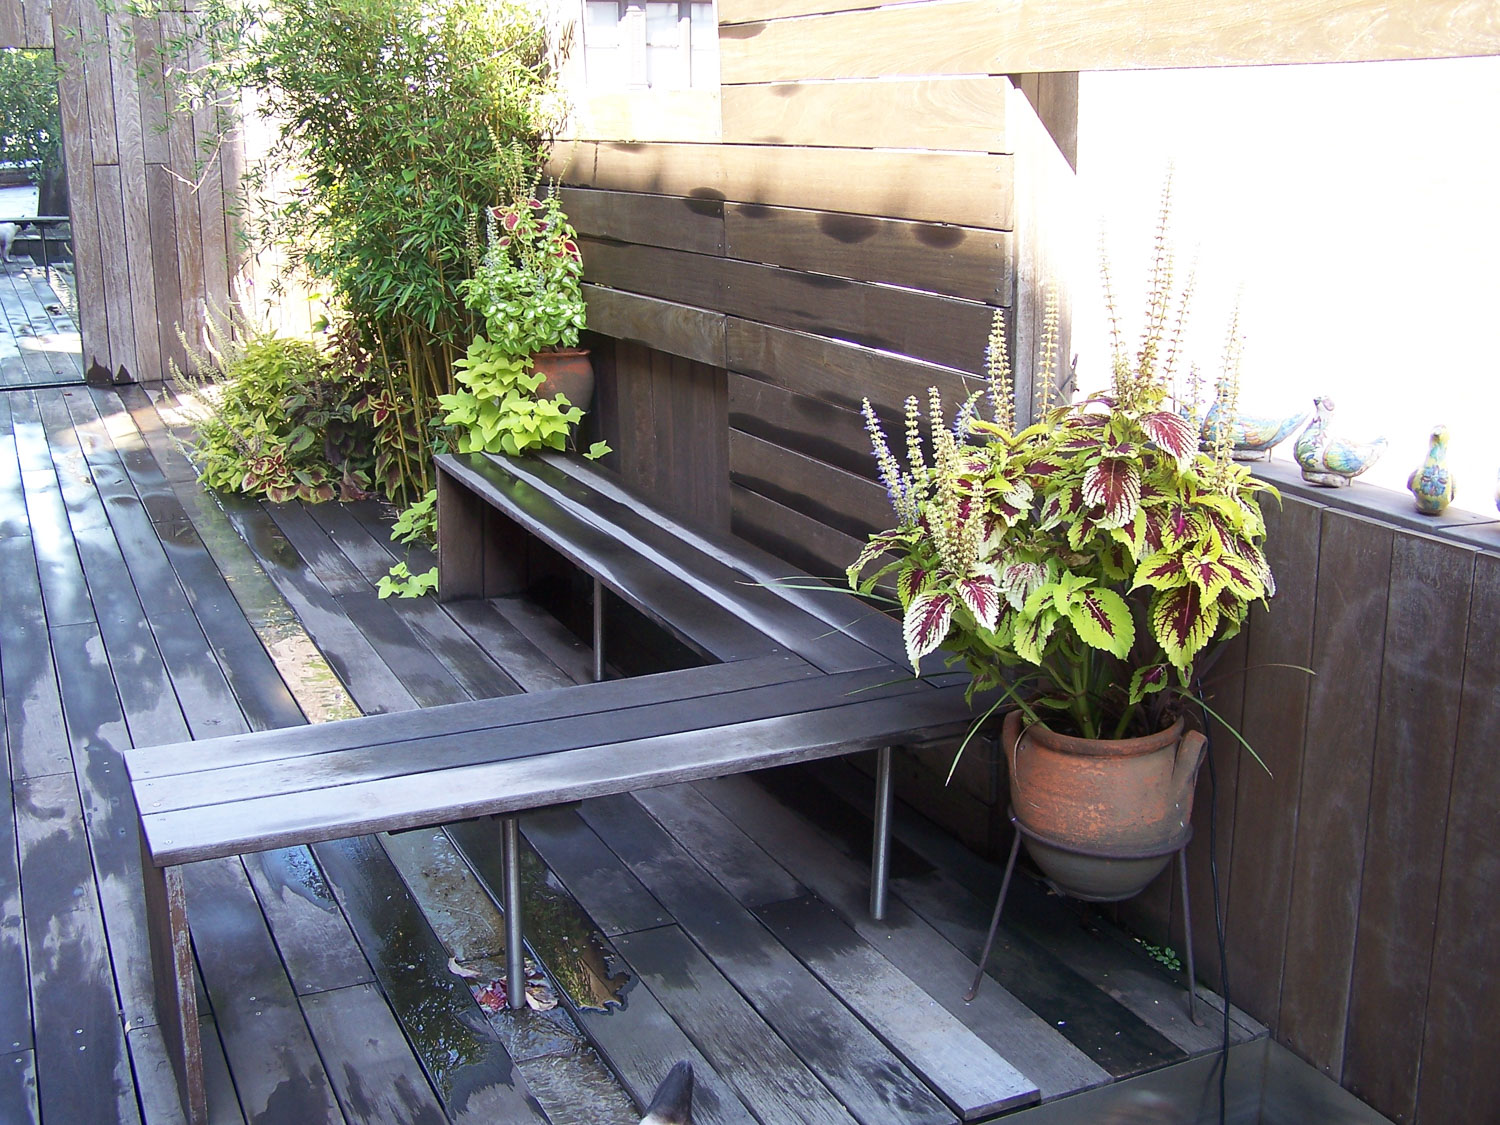 05_bench_Petroulas Roof Garden by I-Beam_photo by Travis Dubreuil.jpg